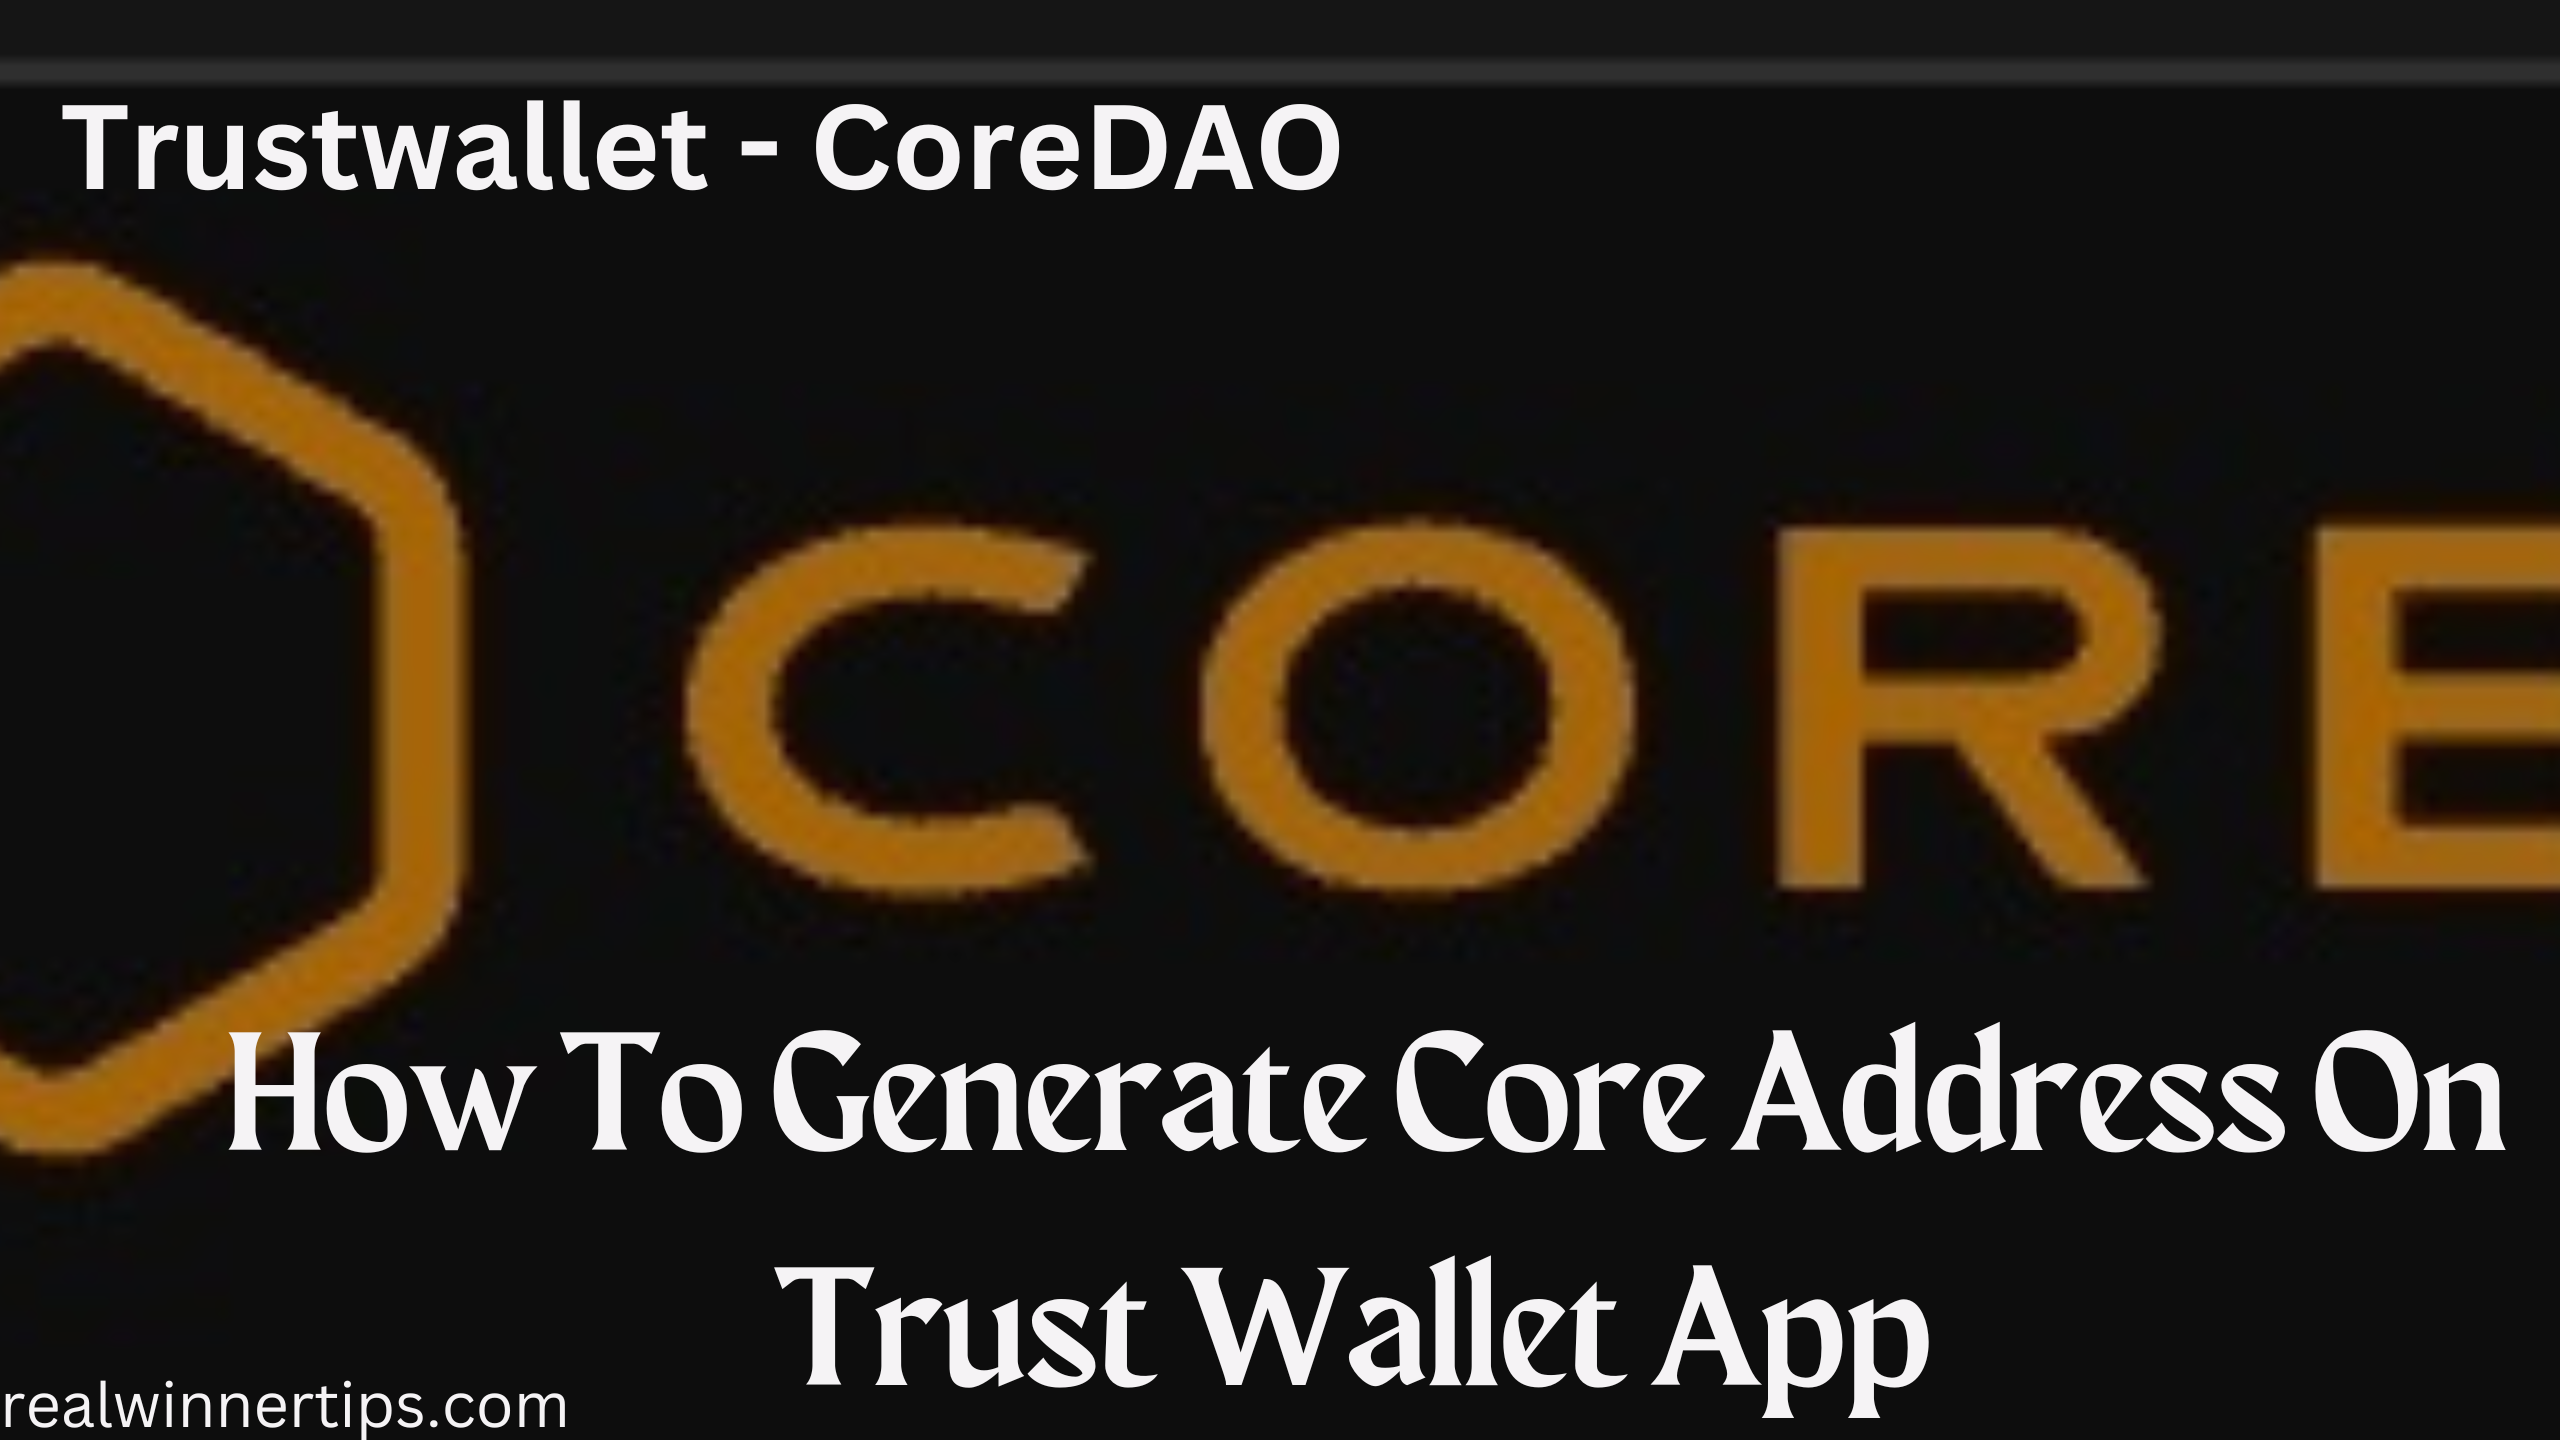 How To Generate Core Address On Trust Wallet App